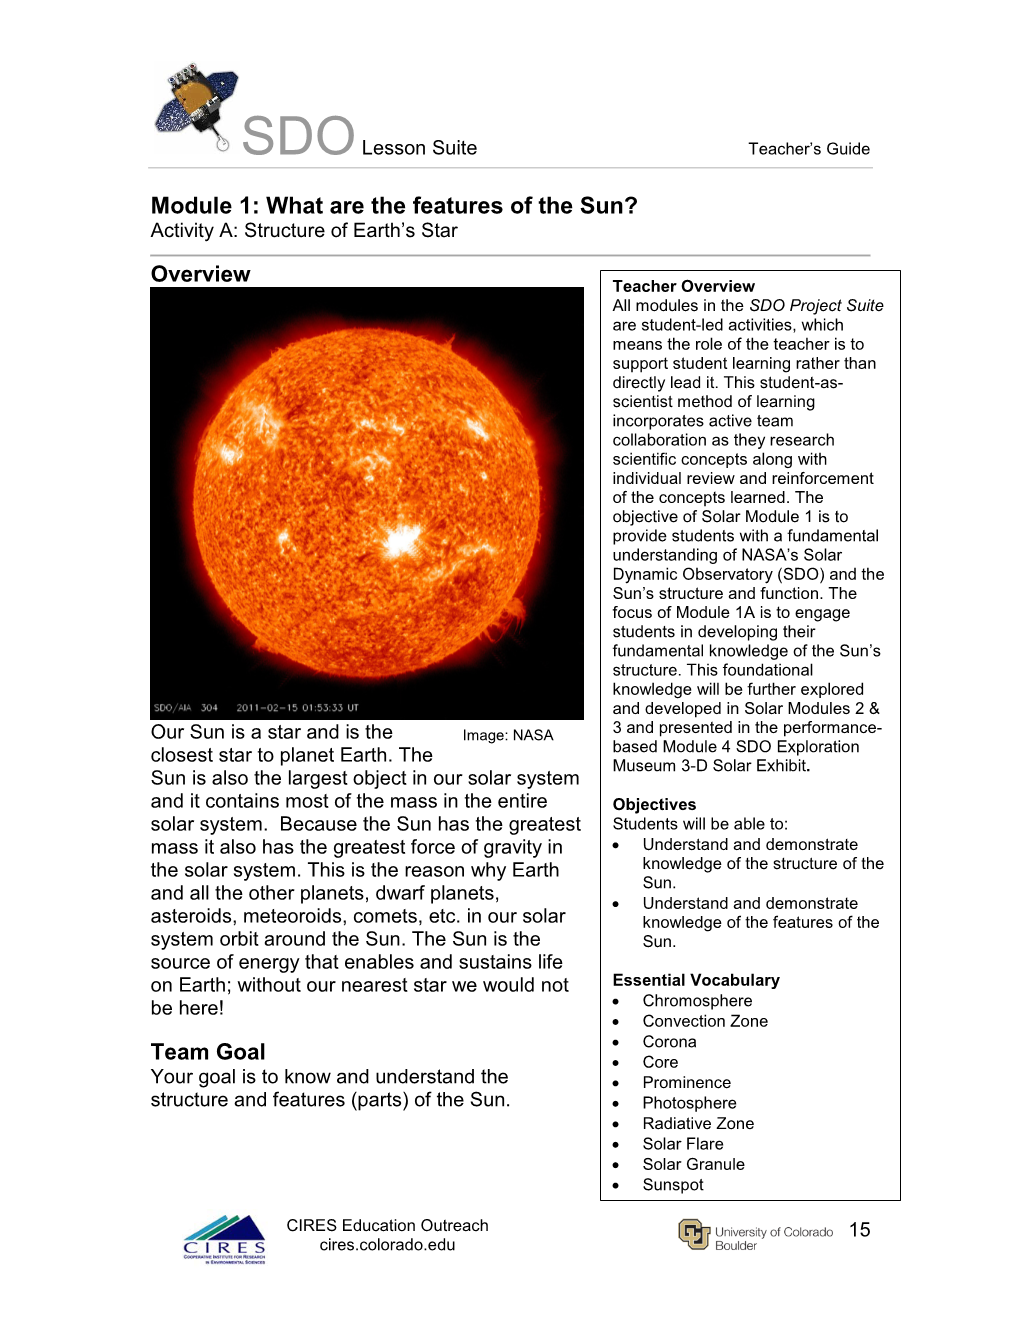 Module 1: What Are the Features of the Sun? Activity A: Structure of Earth’S Star